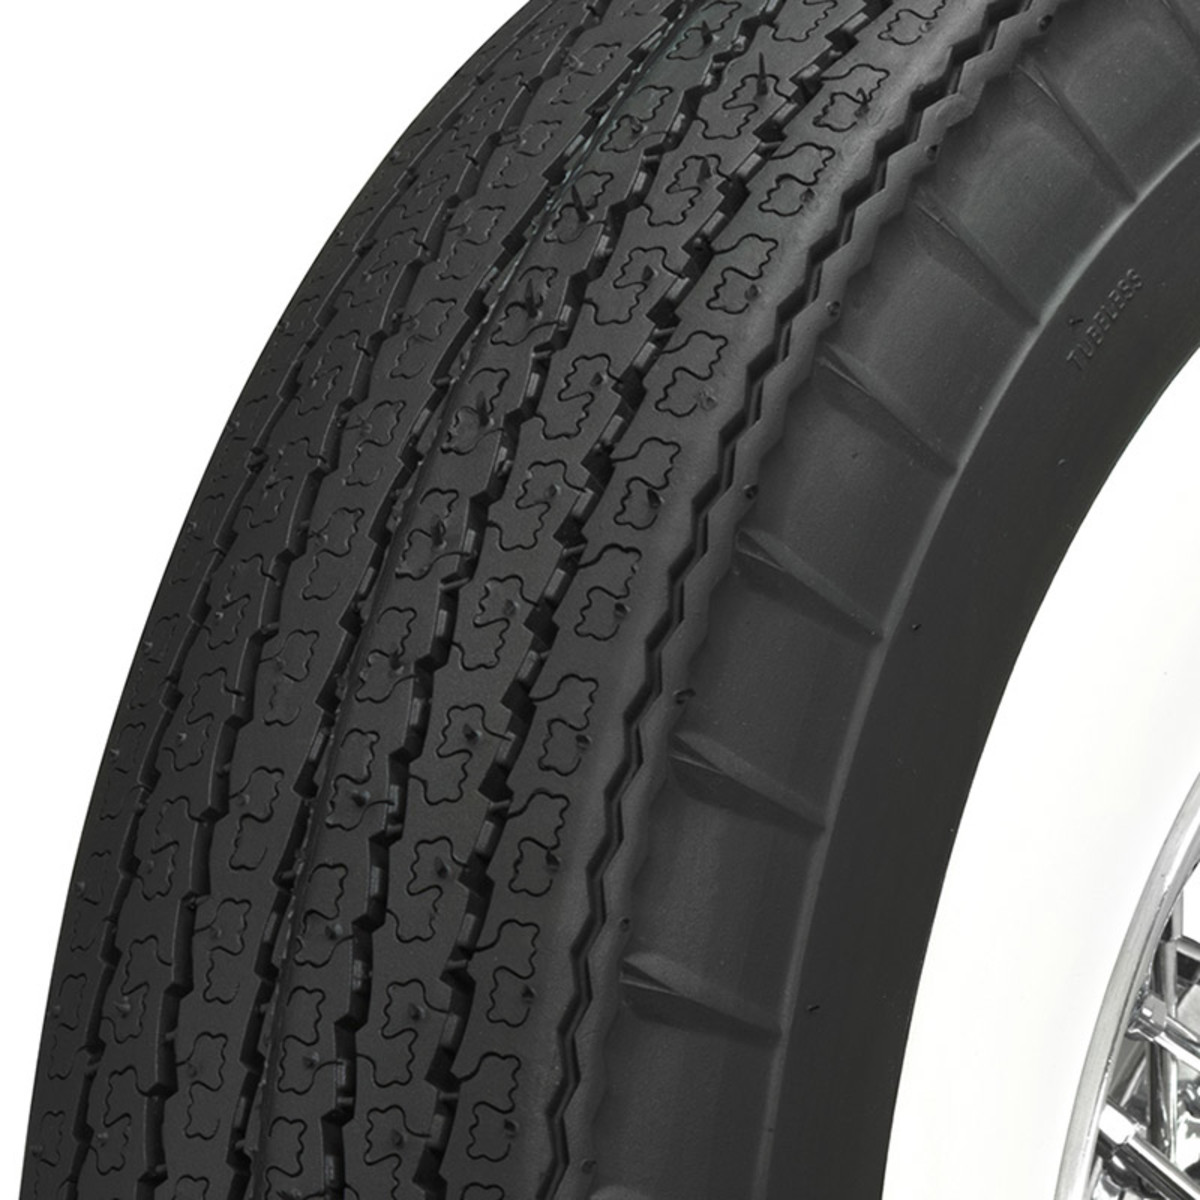 Coker Tire's new American Classic radial tire with the look of a bias-ply tire.